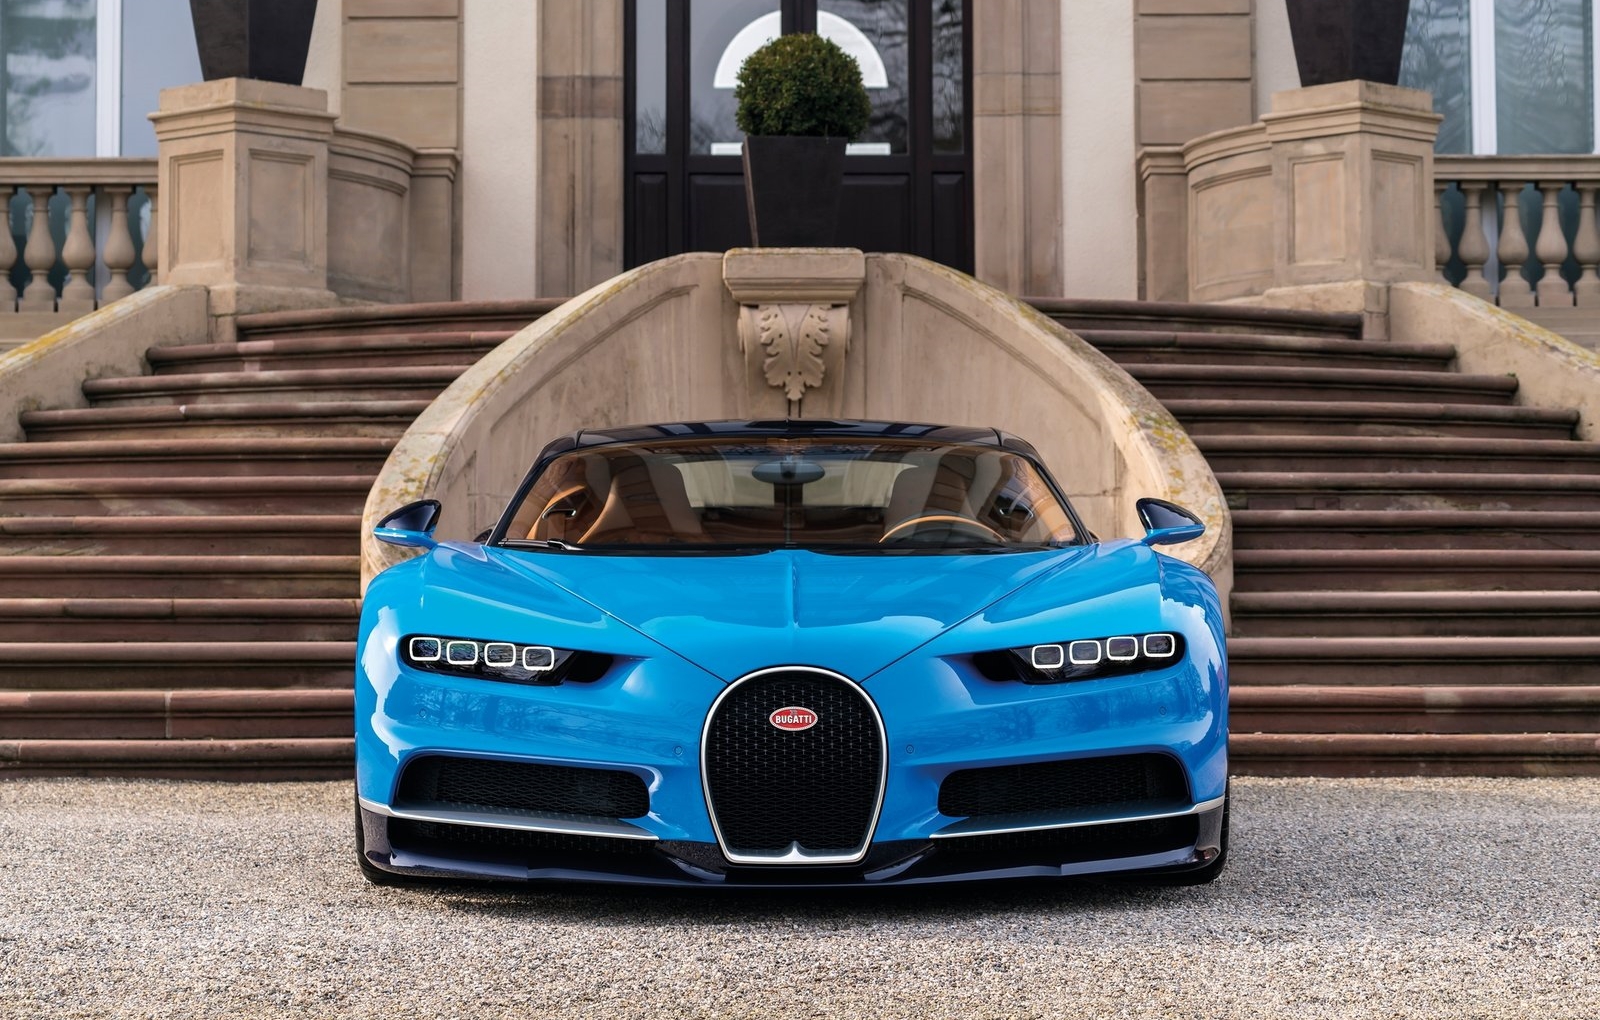 Bugatti Chiron Wallpaper Image Photos Pictures Background